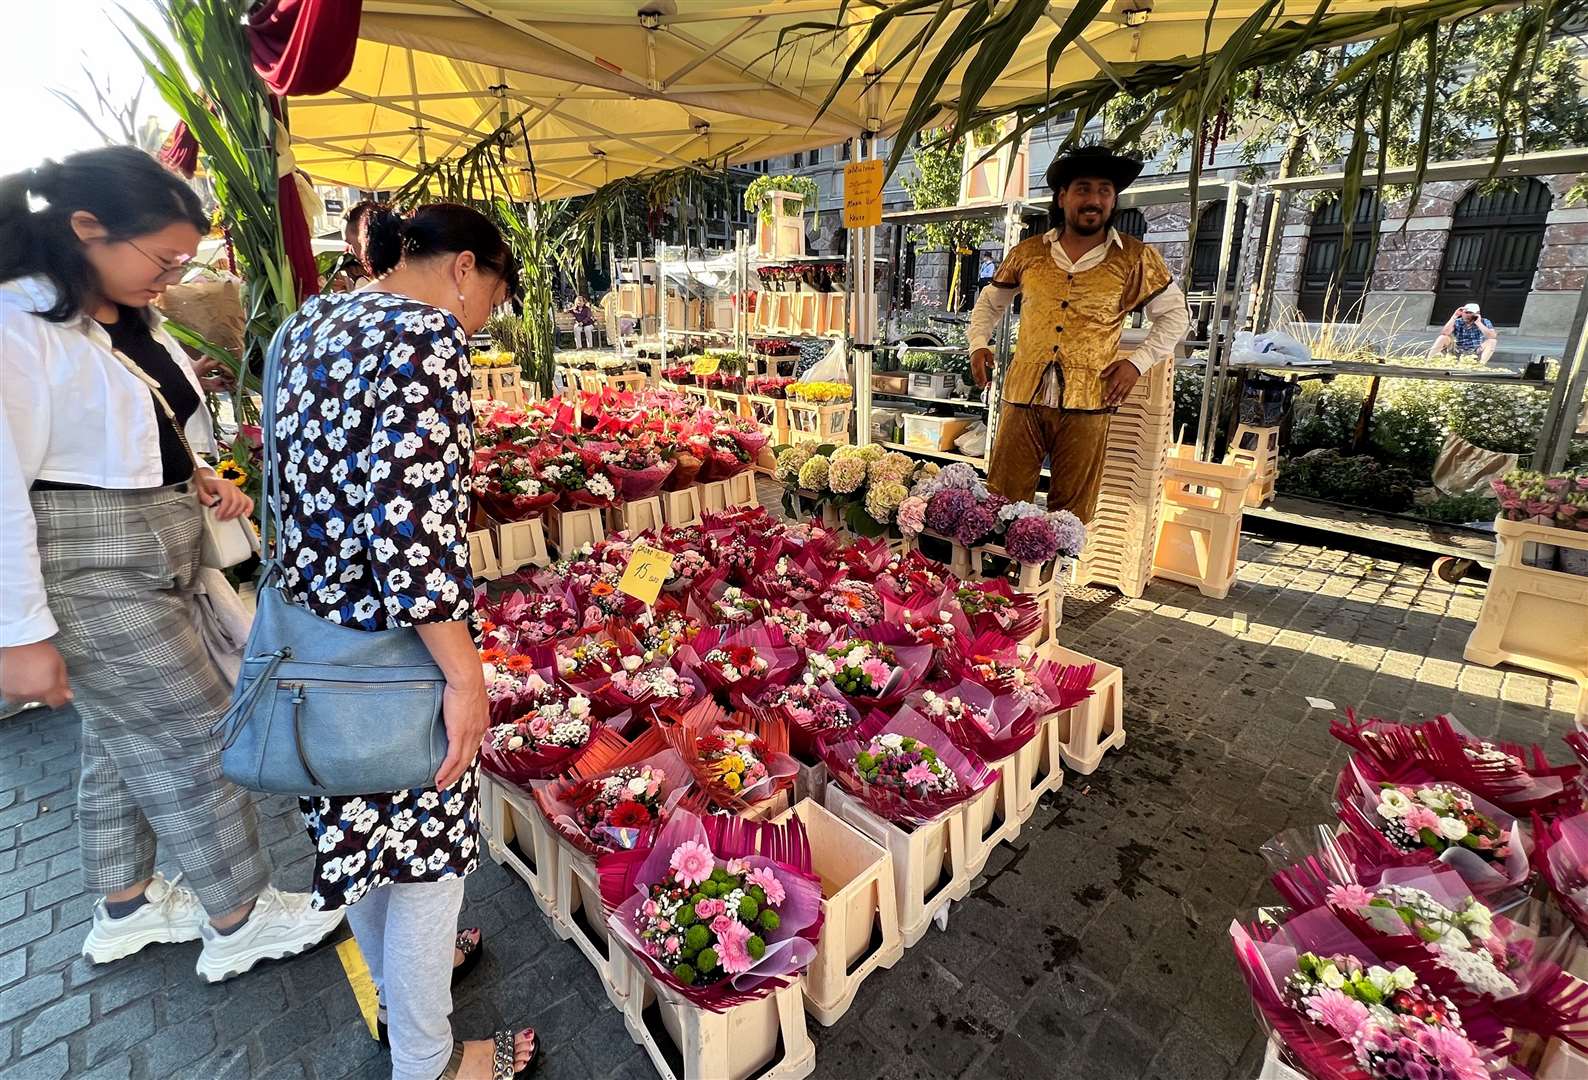 Grote Market, transported back to the 17th century, was selling flowers for Mother’s Day